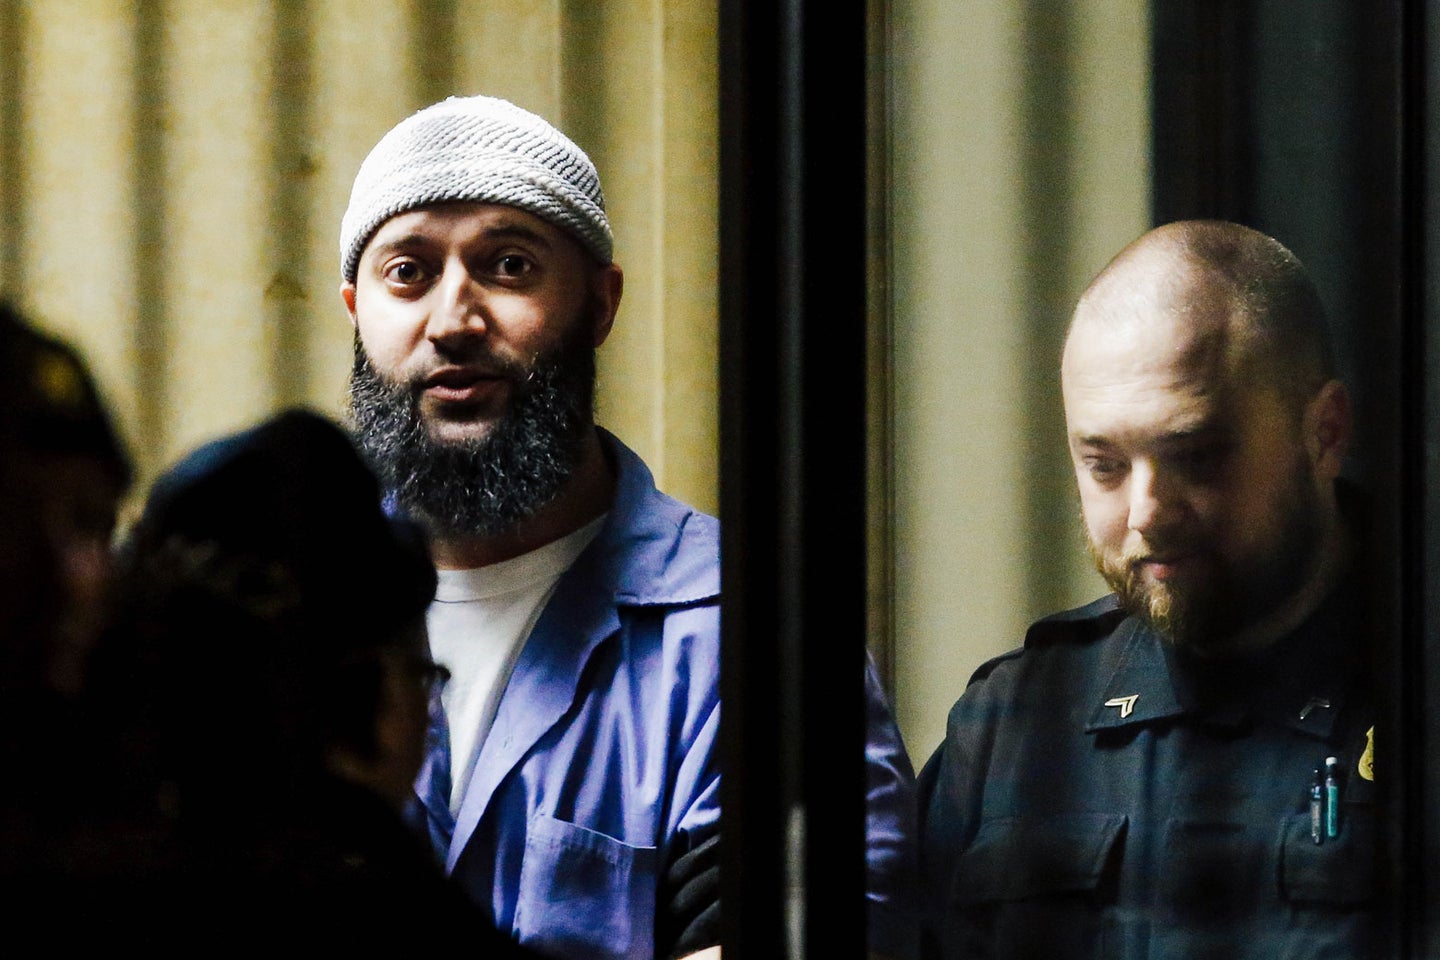 Adnan Syed deserves a new trial but will never get one.